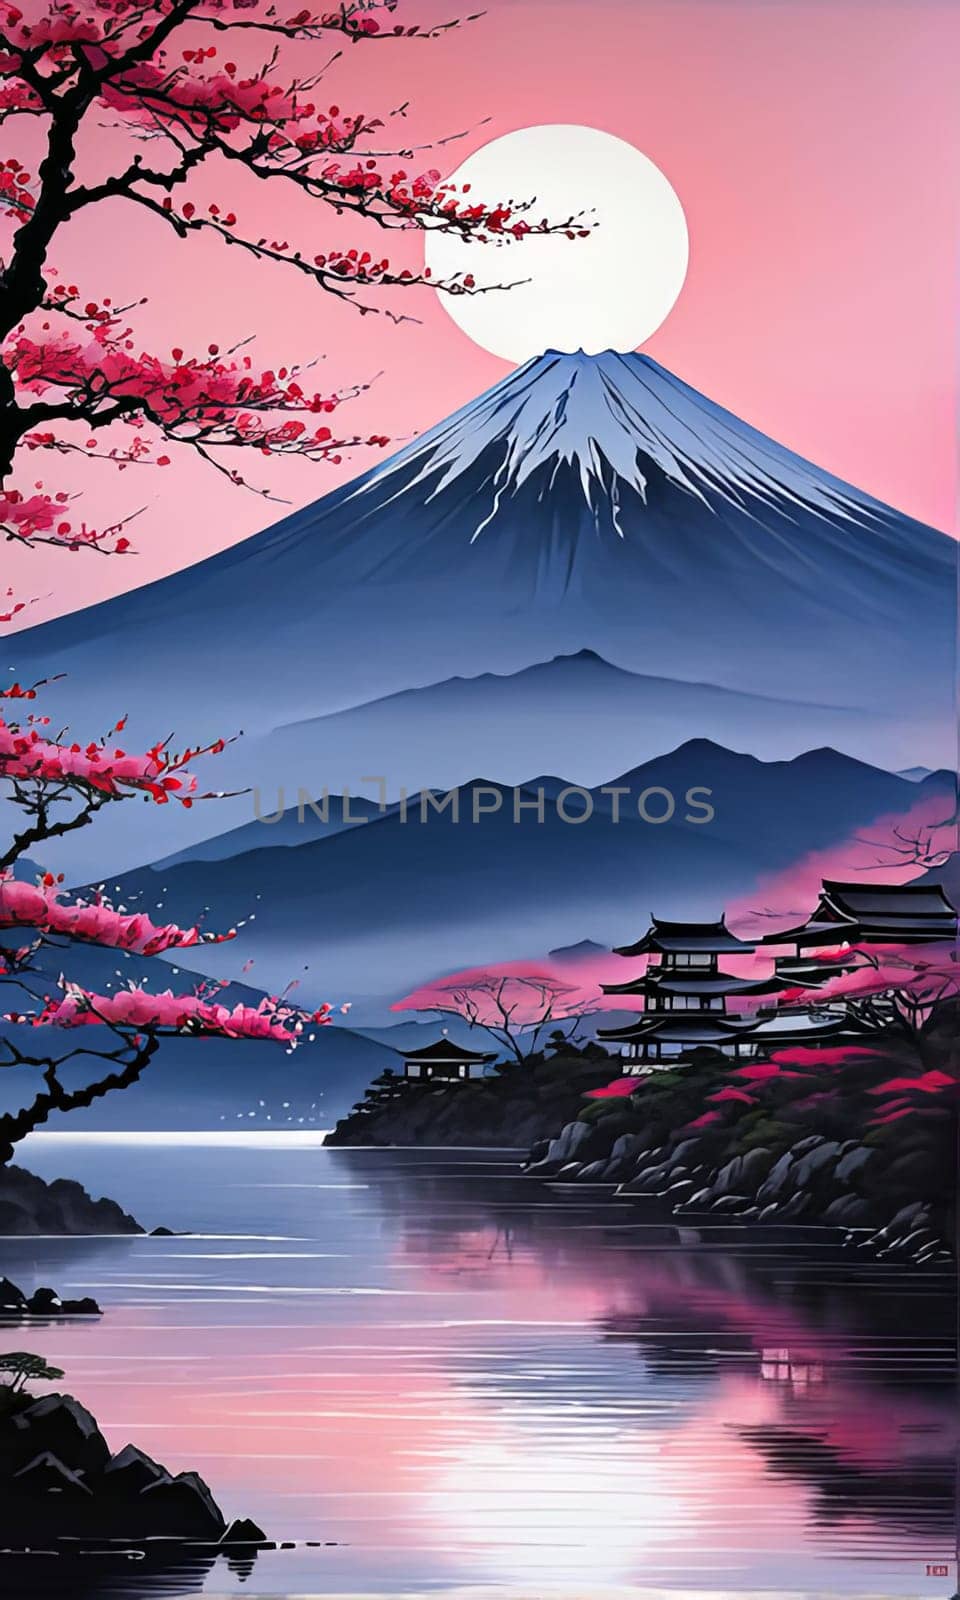 Beauty of cherry blossoms in full bloom reflected on tranquil surface of lake, creating peaceful harmonious scene. For art, creative projects, fashion, style, advertising campaigns, blogs, magazine